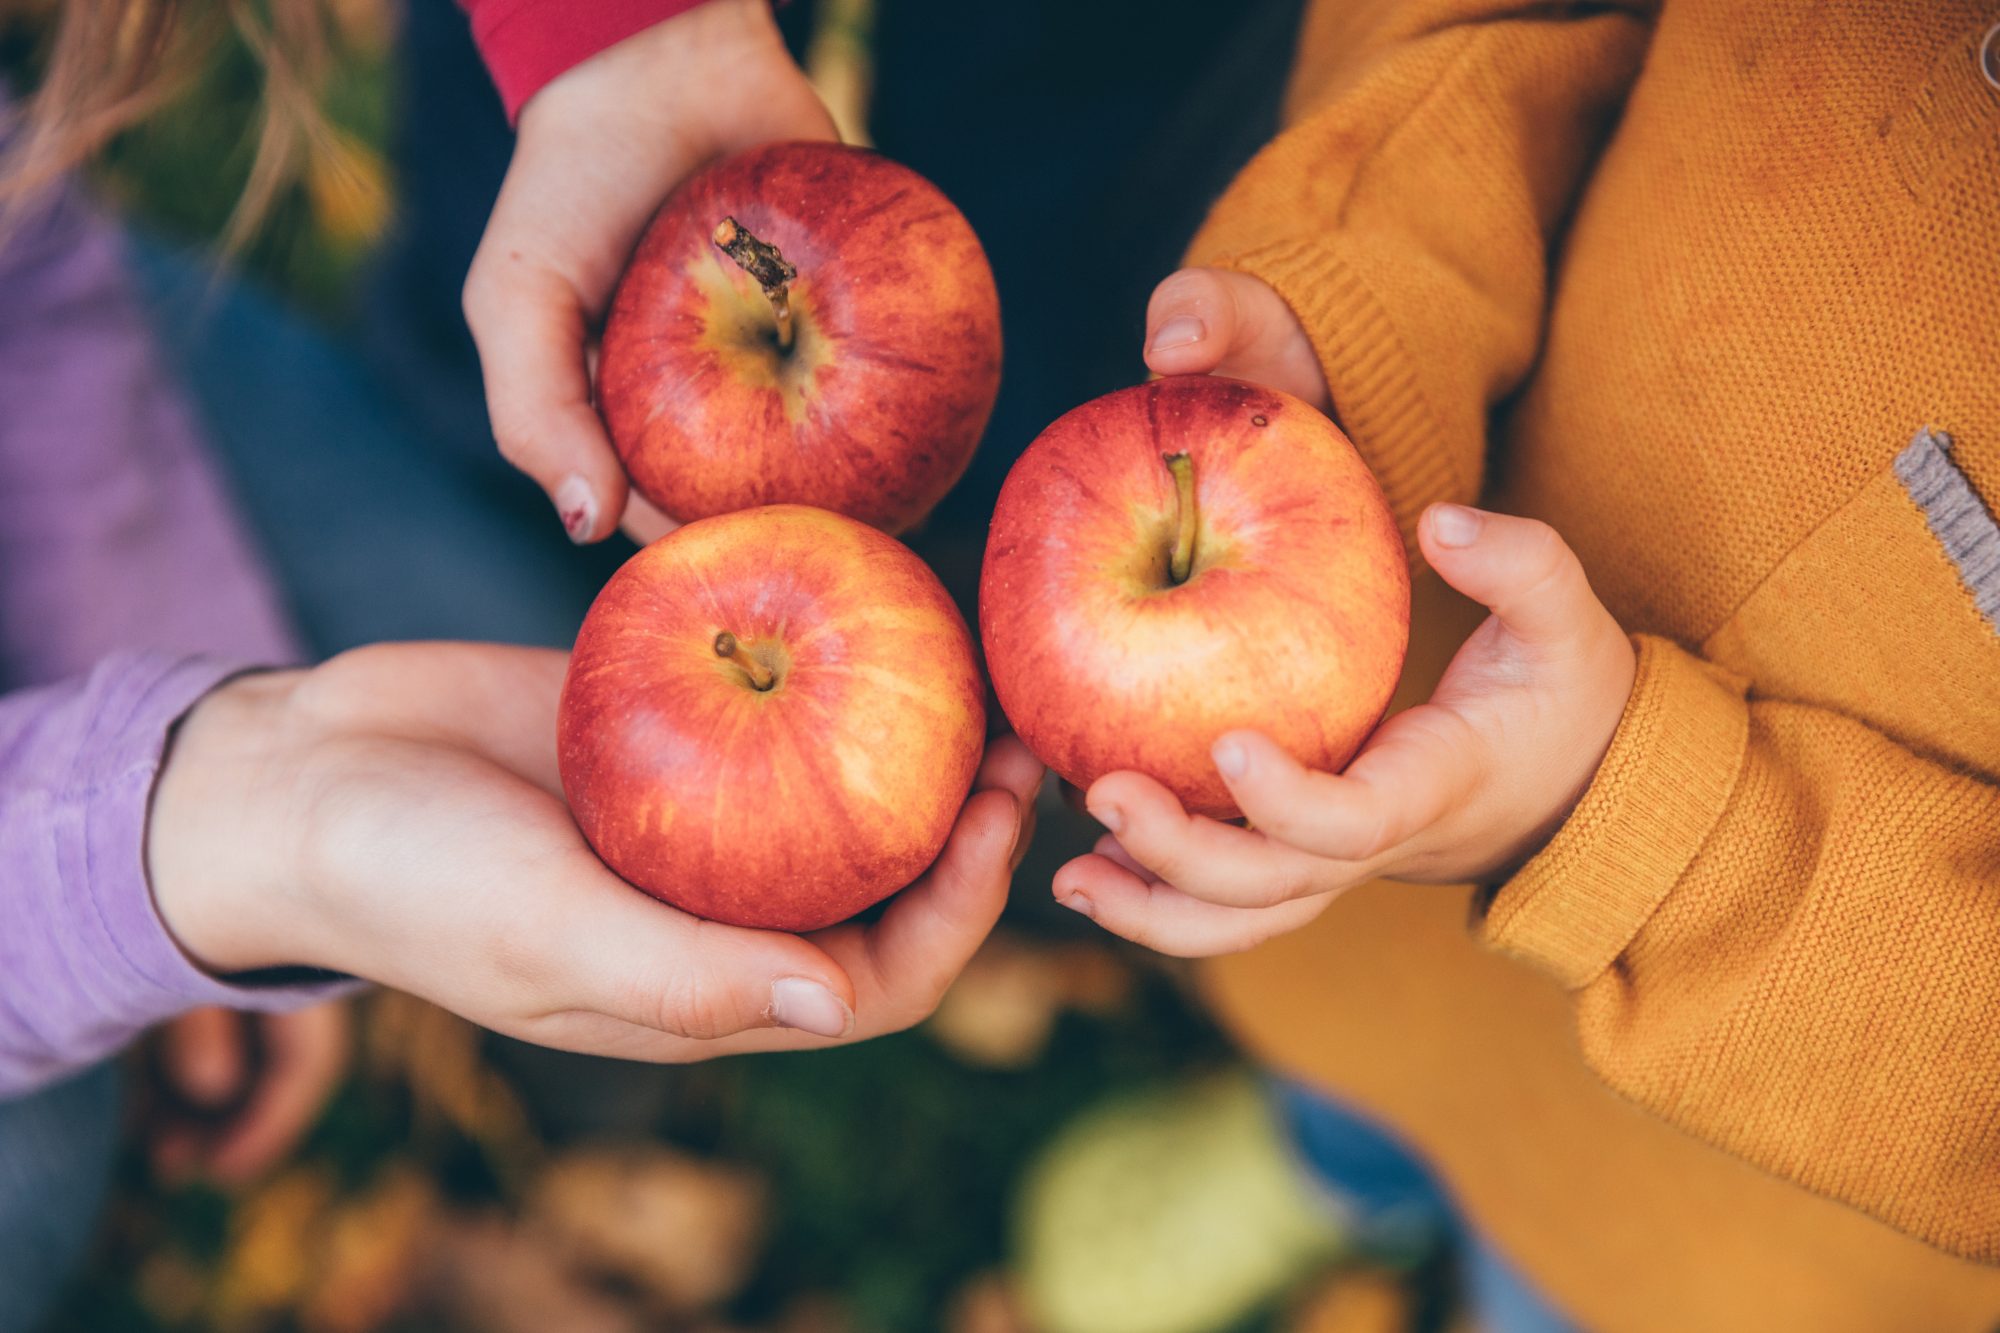 The 50 Best Spots for Apple Picking in the US, According to Yelp